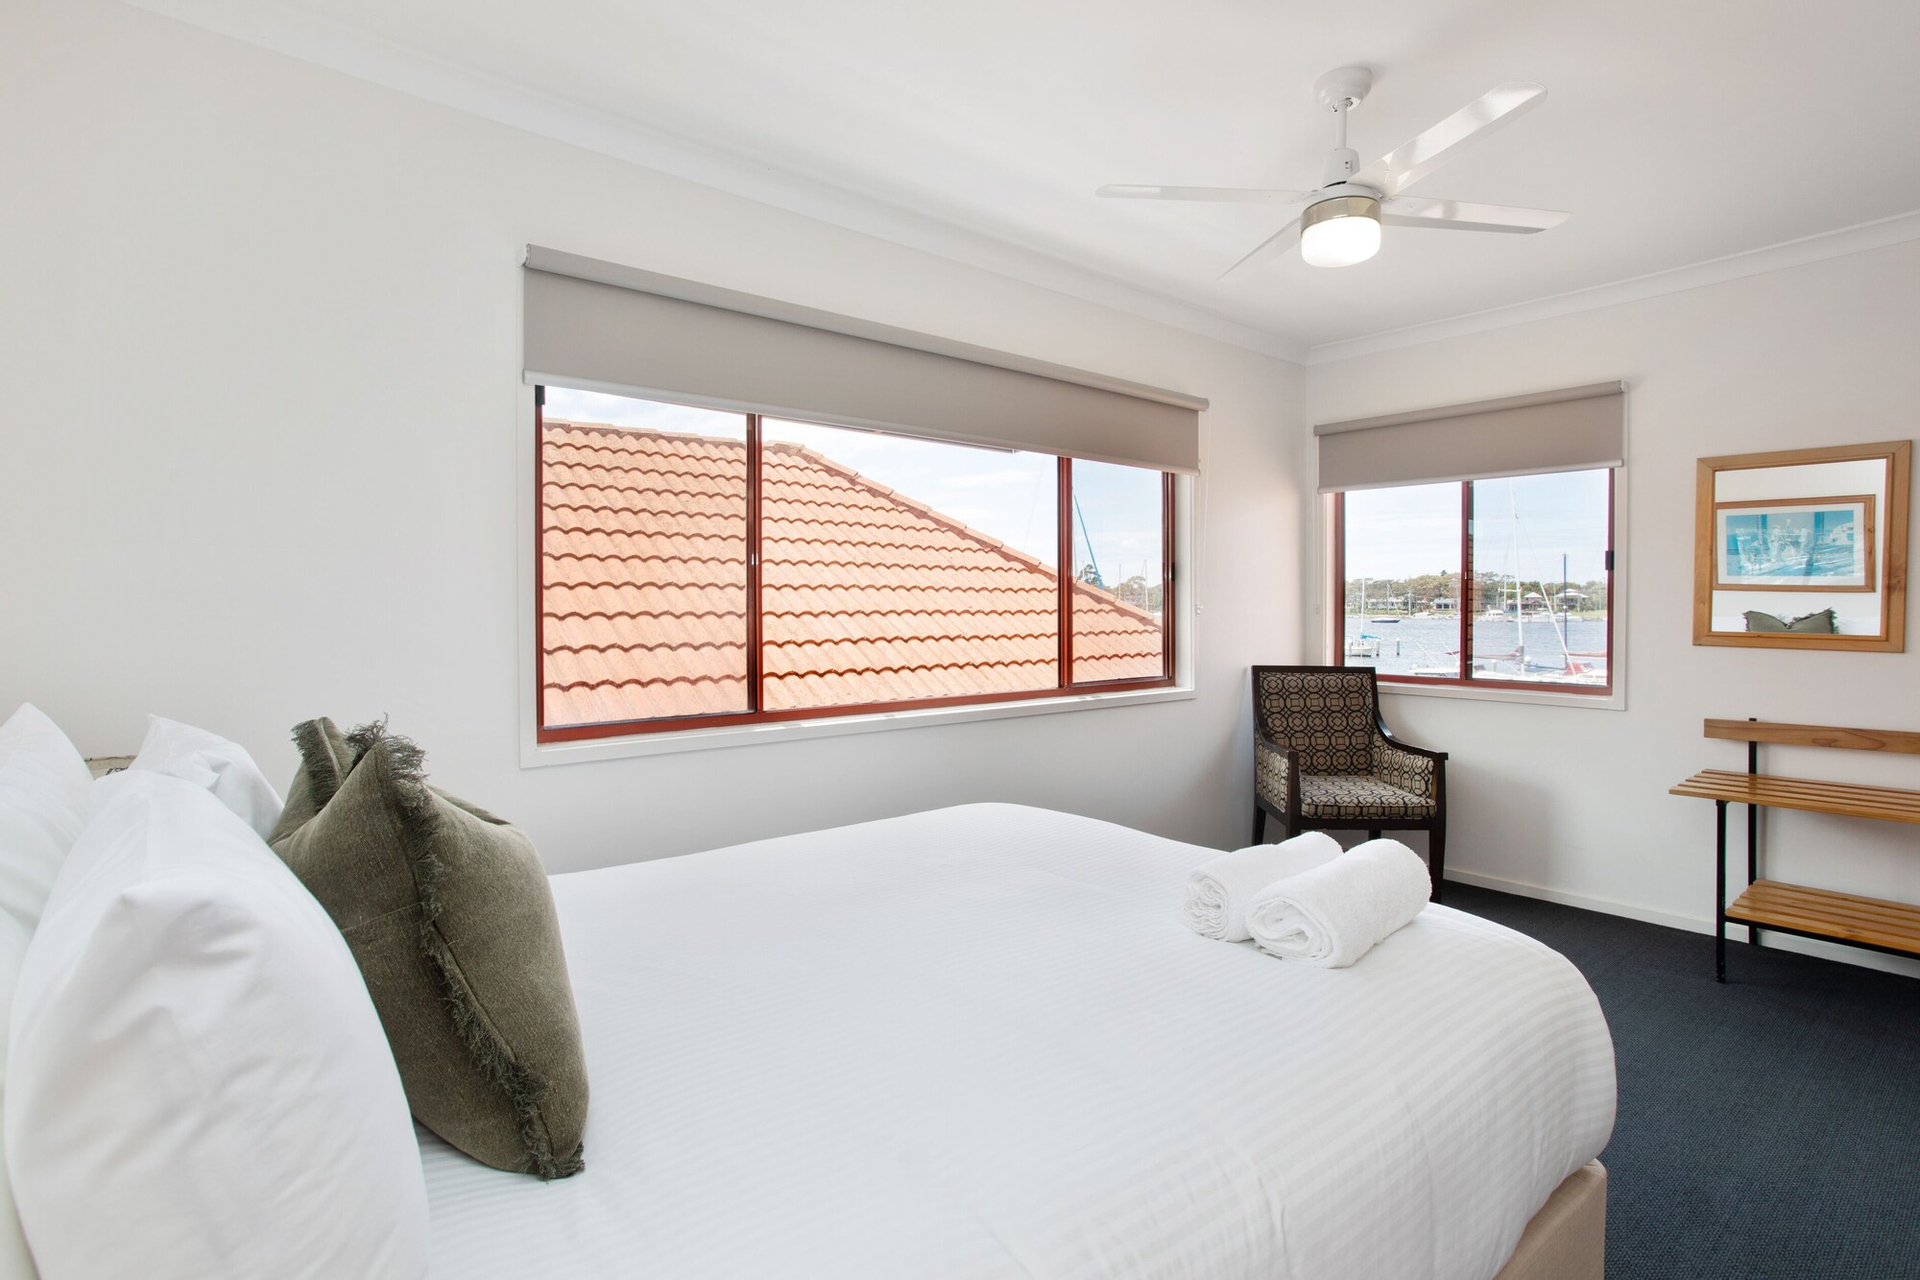 Bedroom 2, Mariners Cove at Paynesville Motel & Apartments, E. Gippsland - Bairnsdale